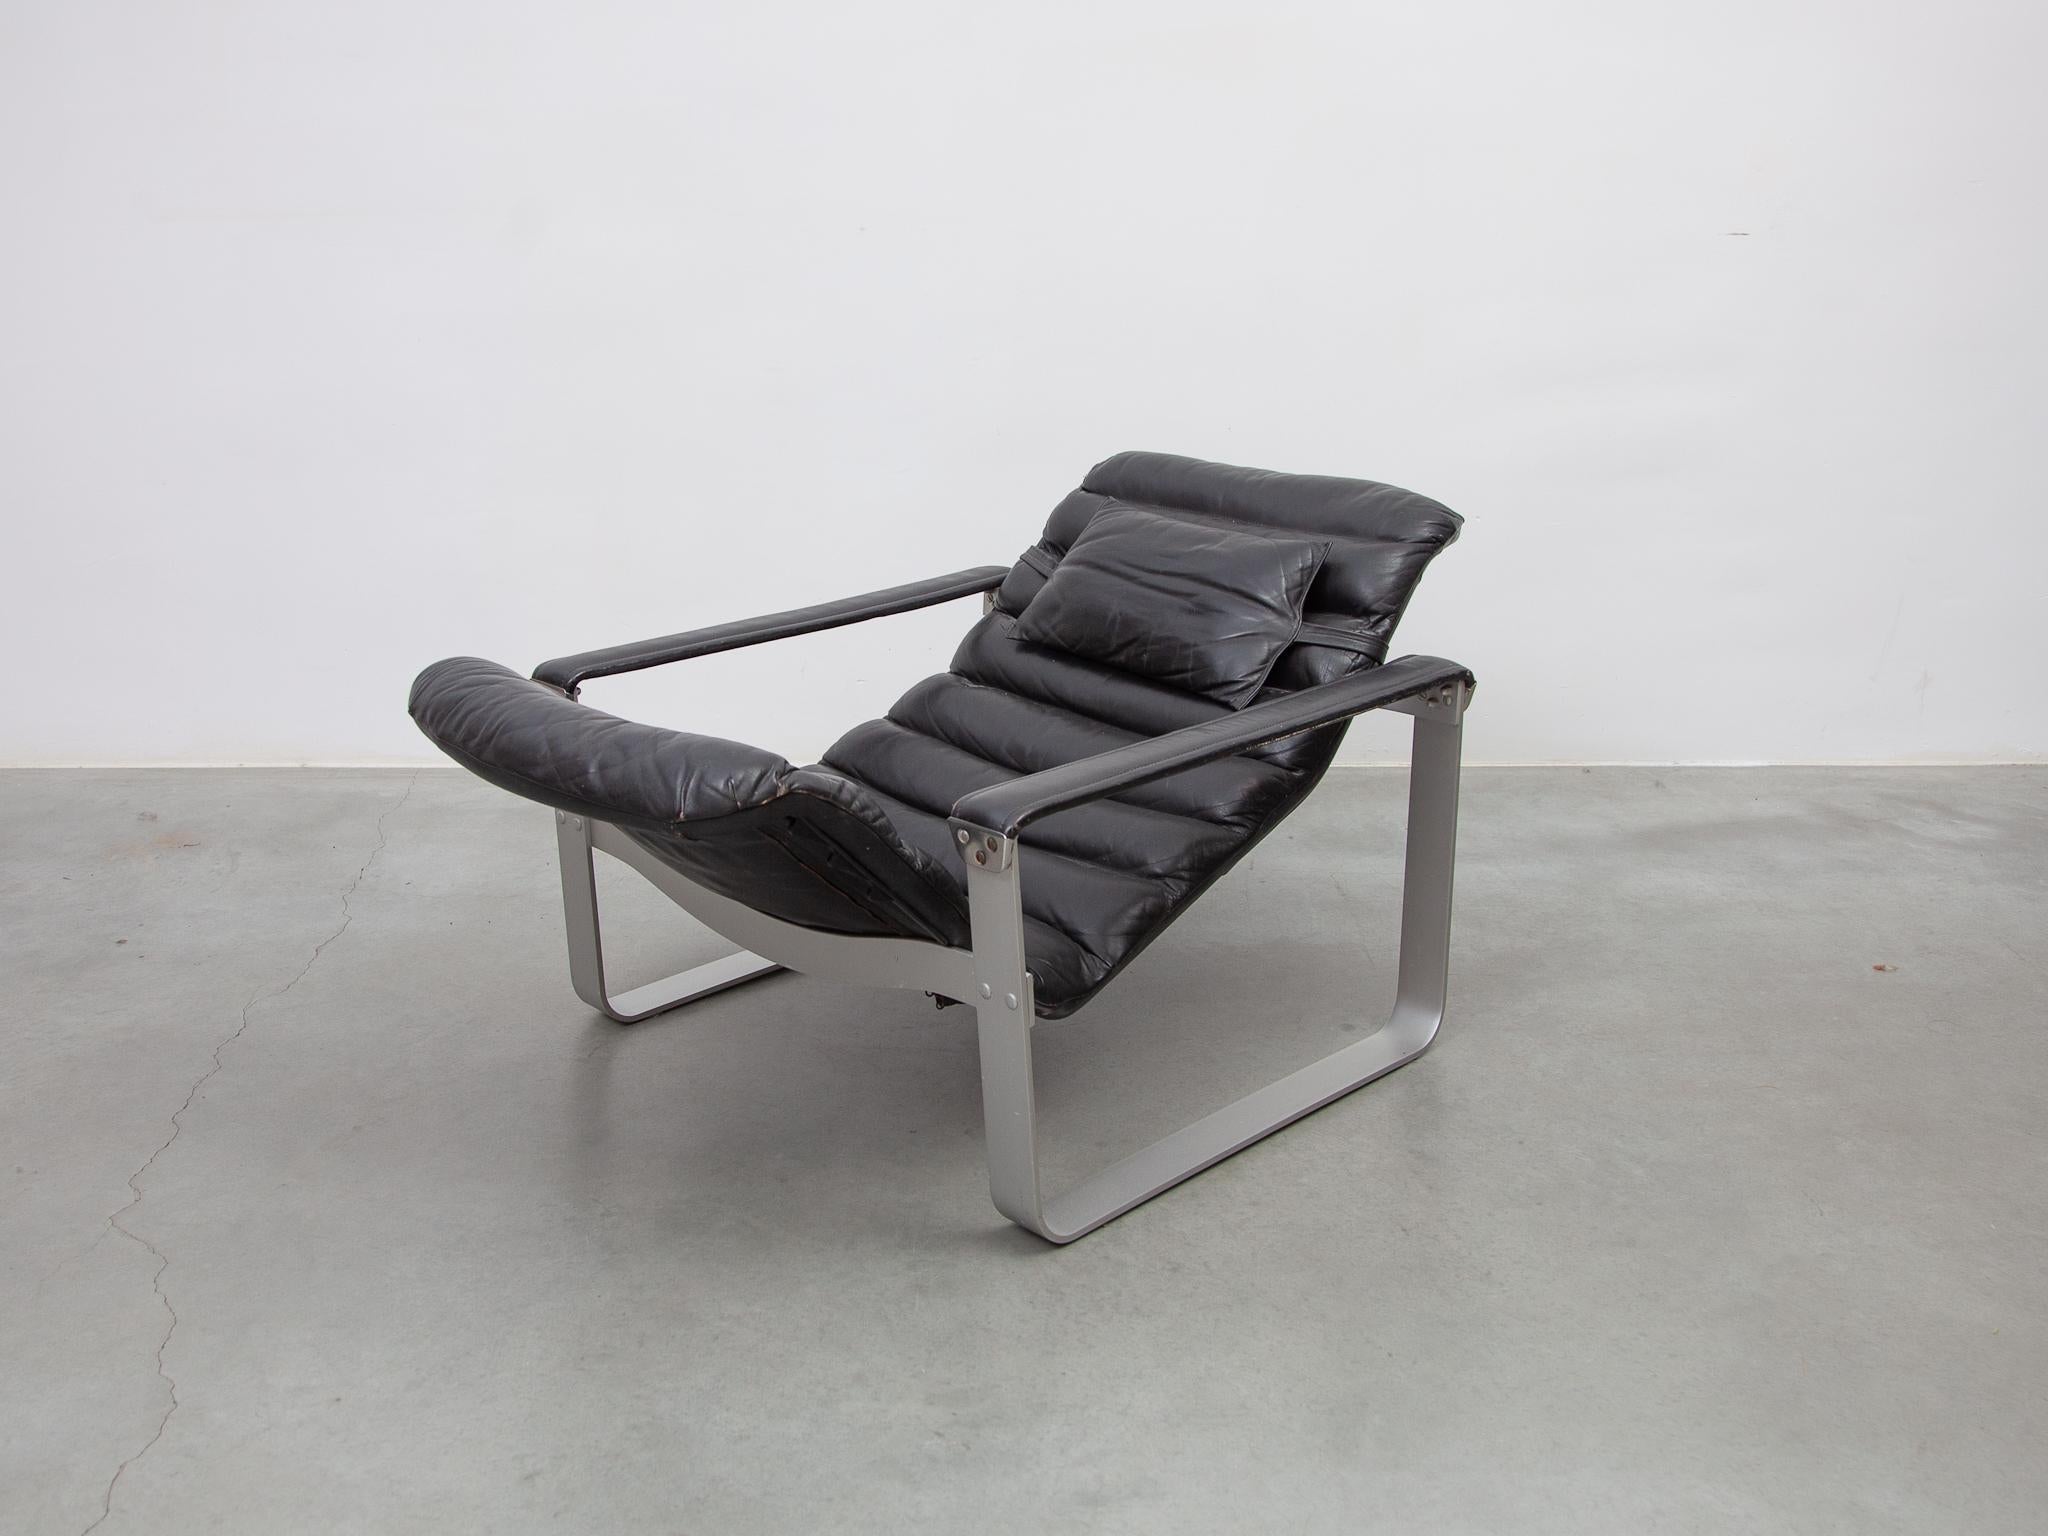 Comfortable lounge chair designed by Ilmari Lappalainen for Asko 1960s. The lounge chair has an aluminum base and are upholstered in a black gradient leather. The seating is adjustable in three stages and very comfortable. Labeled Asko on the